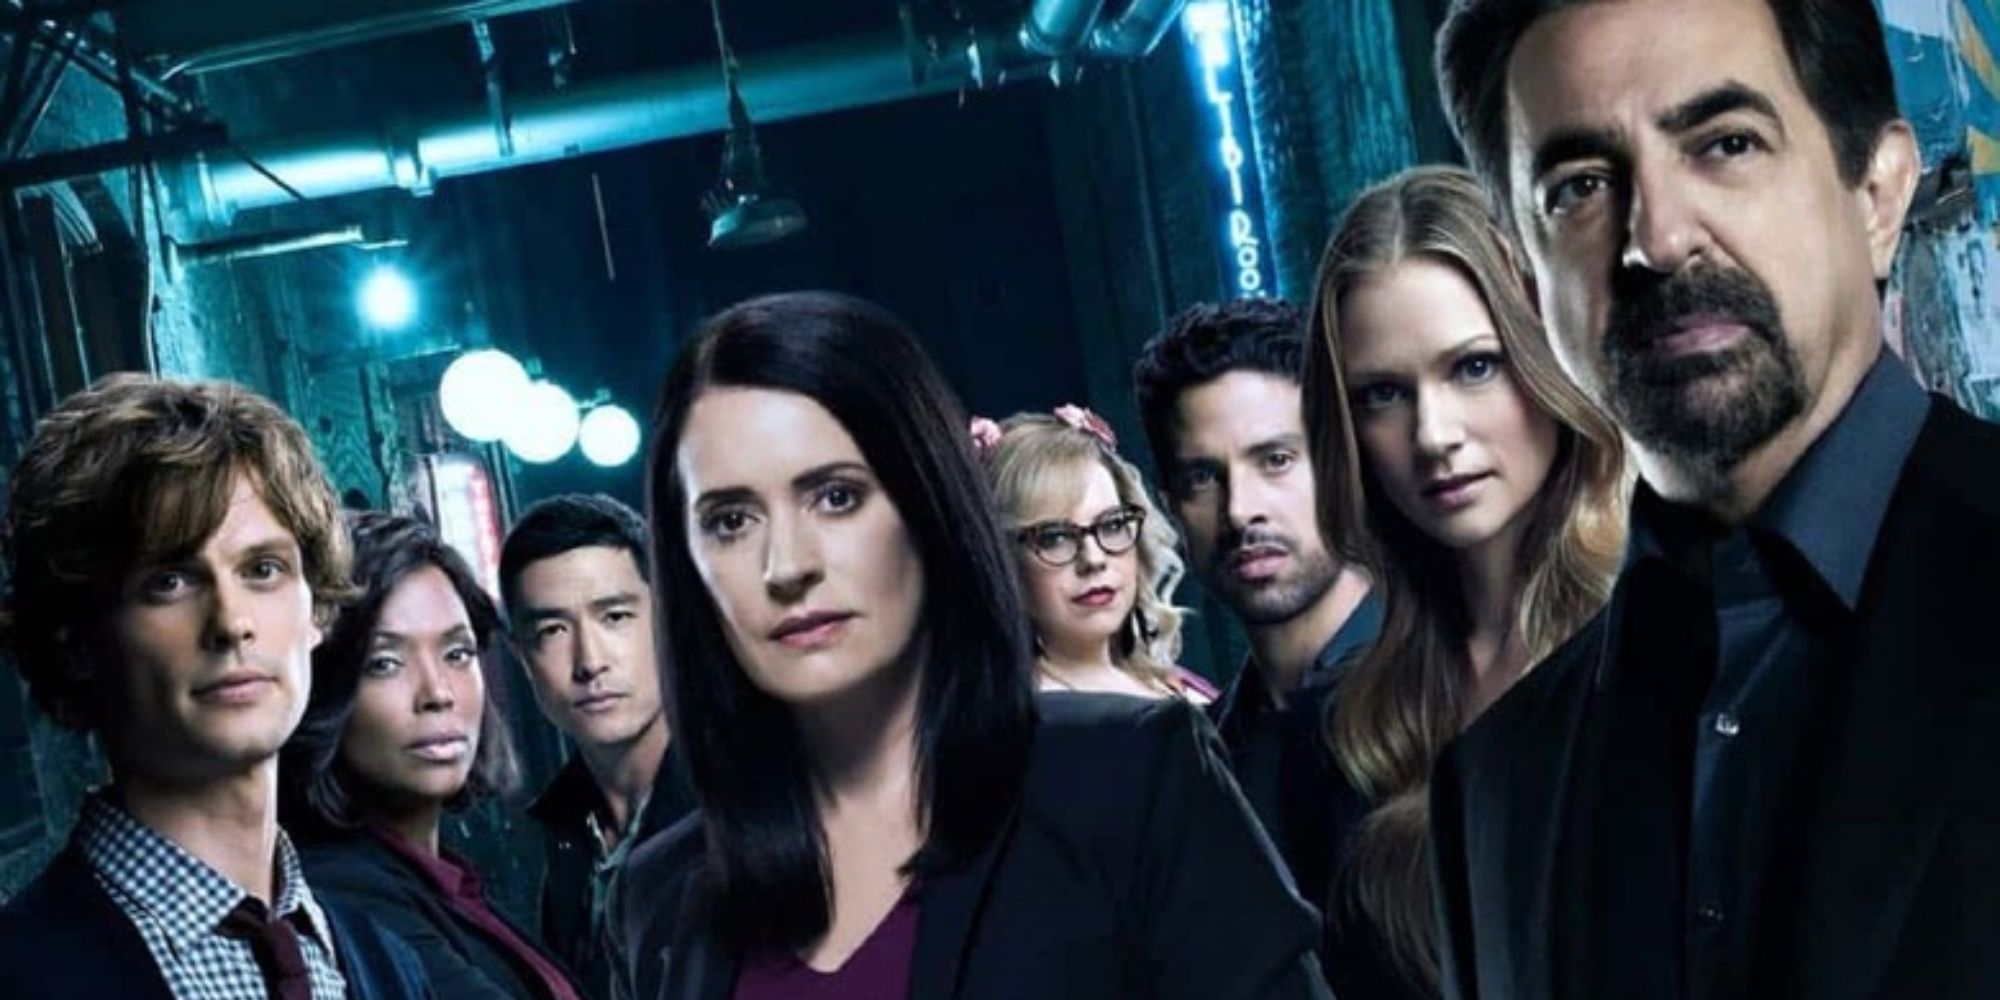 The 'Criminal Minds' Cast Where Are They Now?